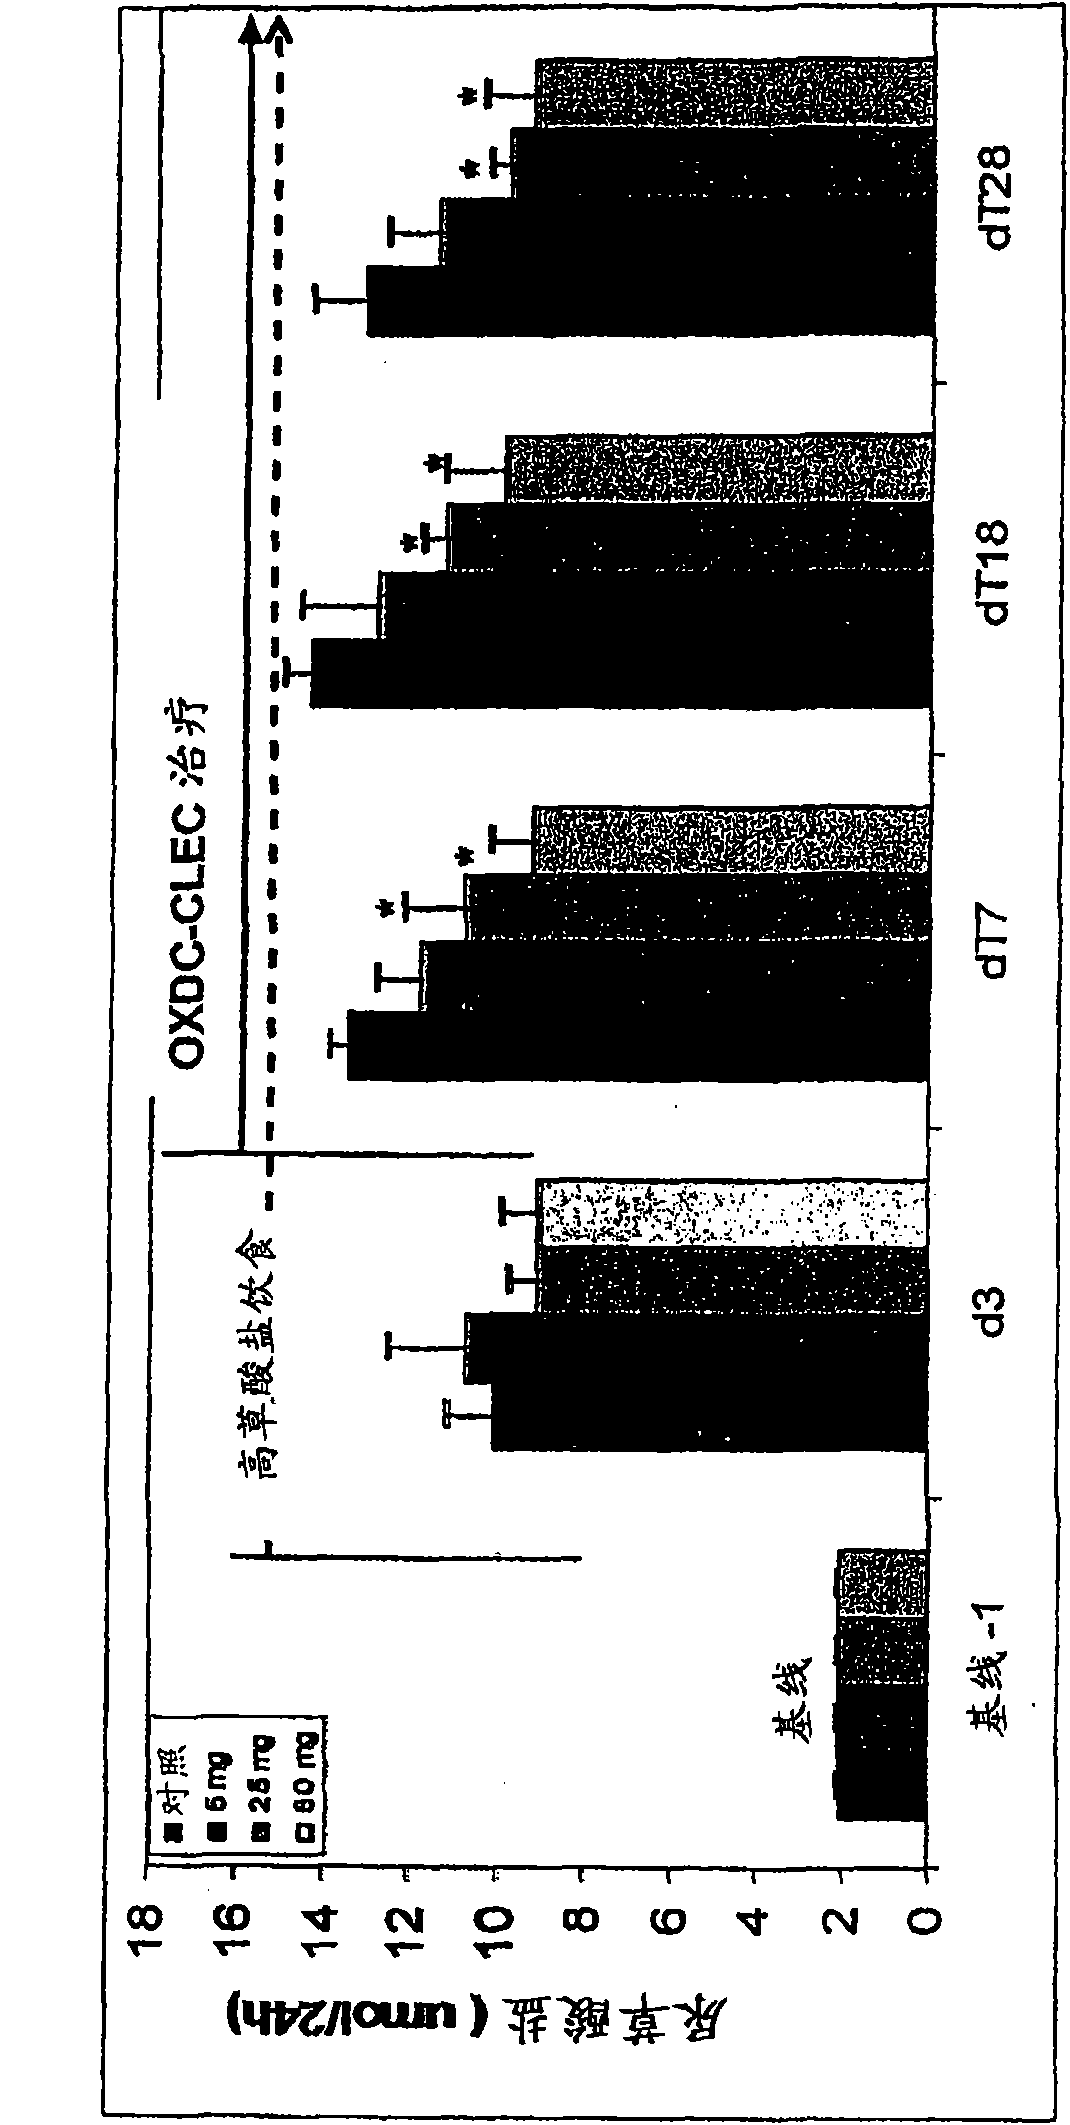 Crystallized oxalate decarboxylase and methods of use